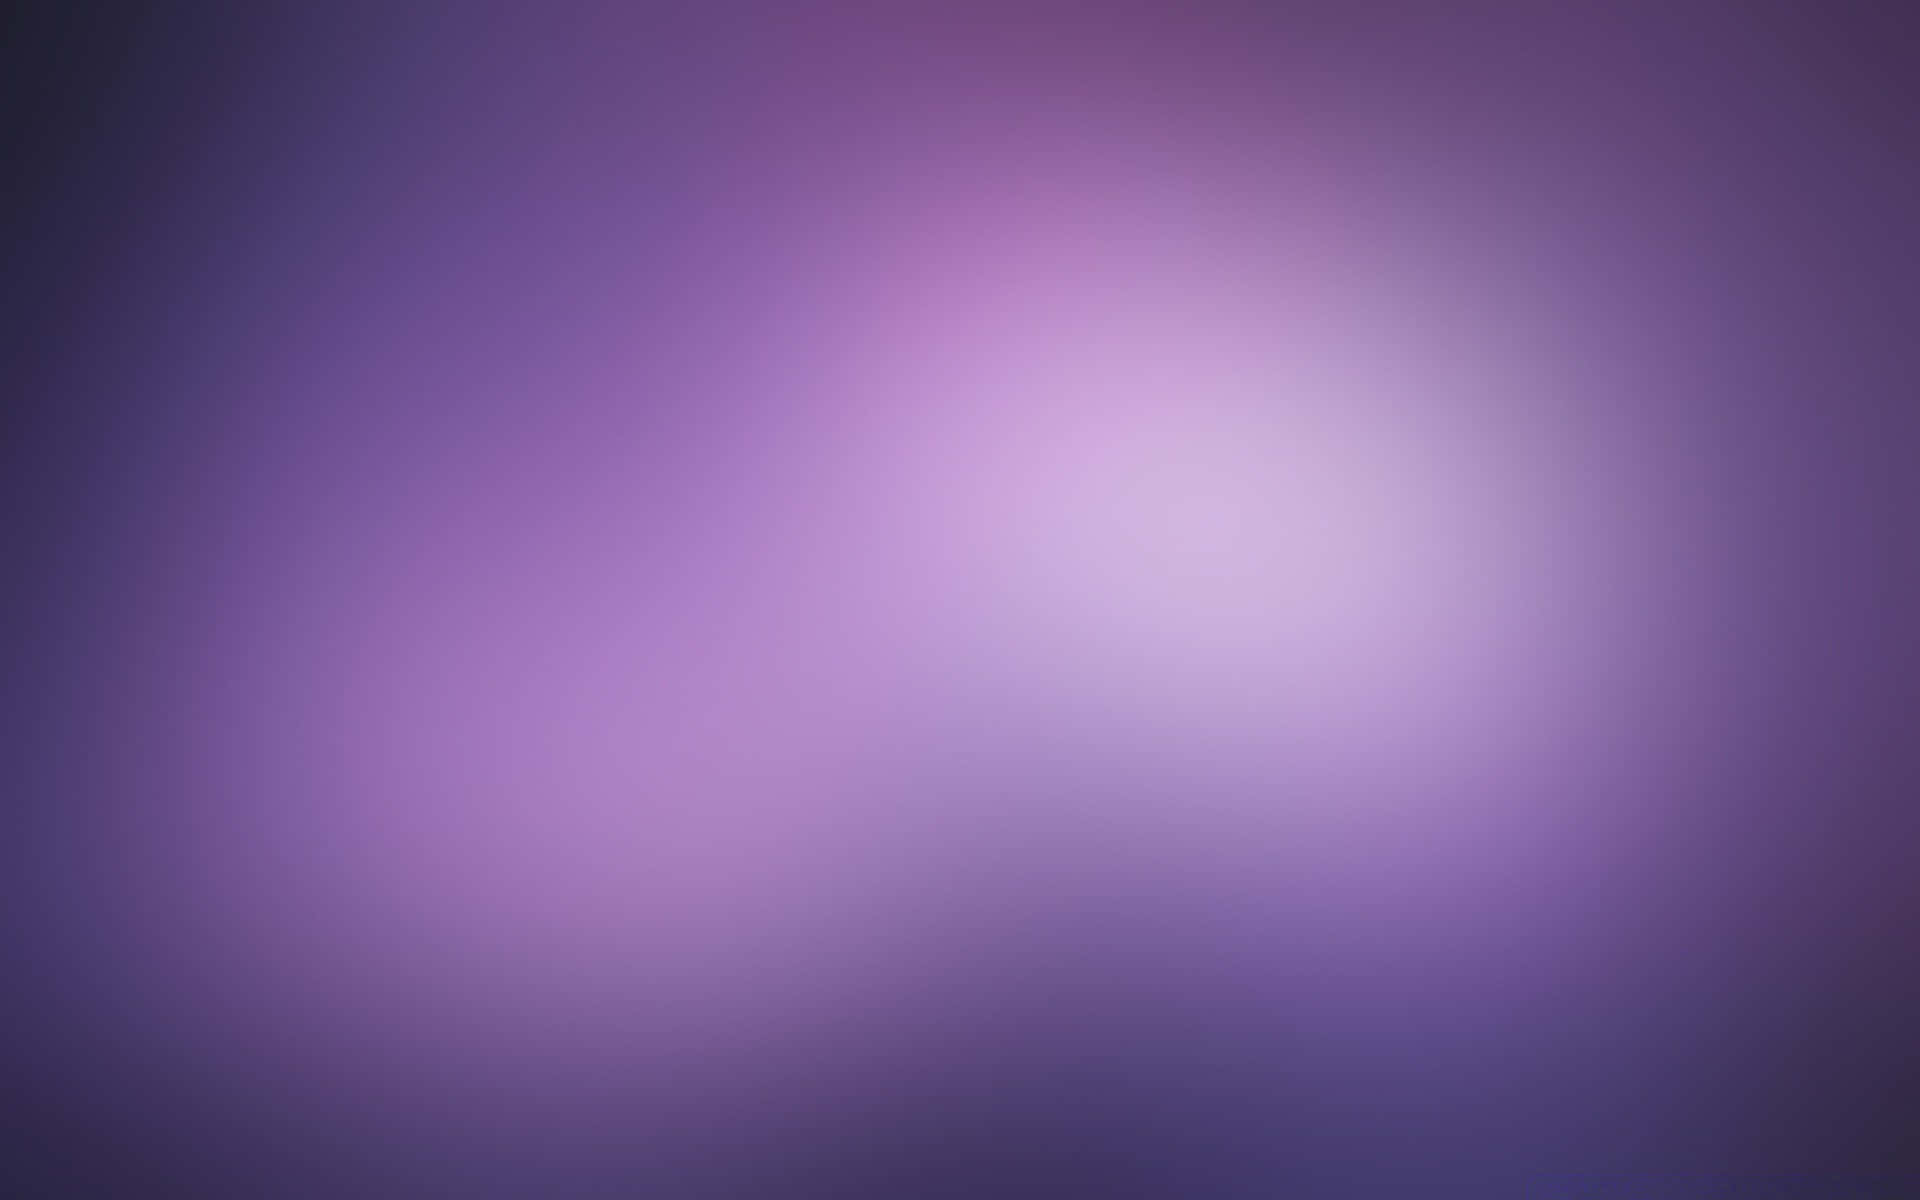 A beautiful view of a solid purple background